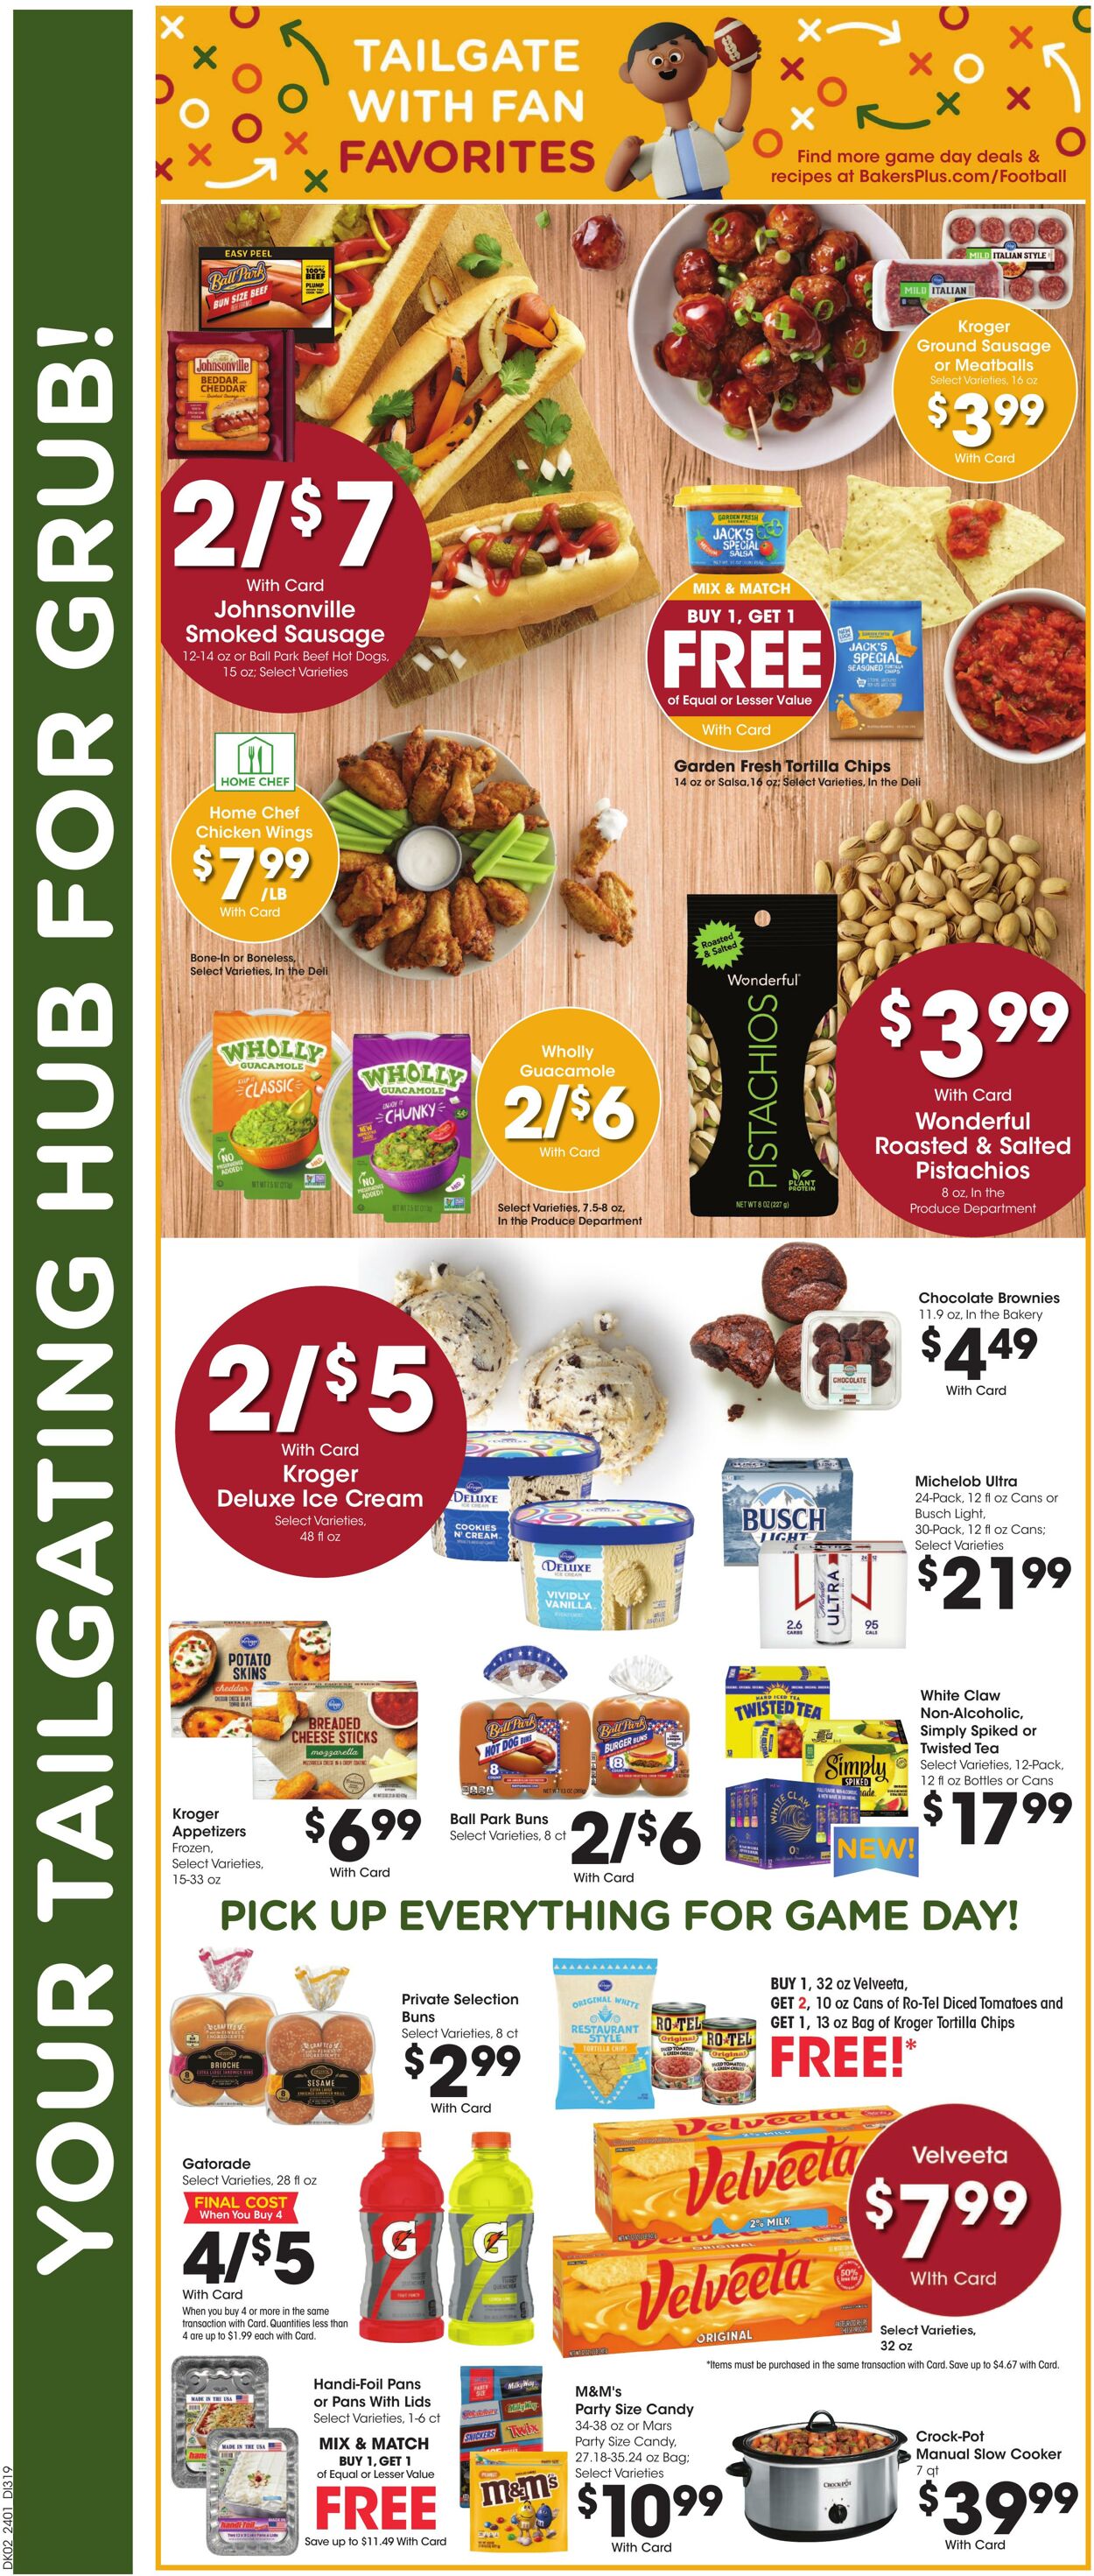 Weekly ad Baker's 02/07/2024 - 02/13/2024